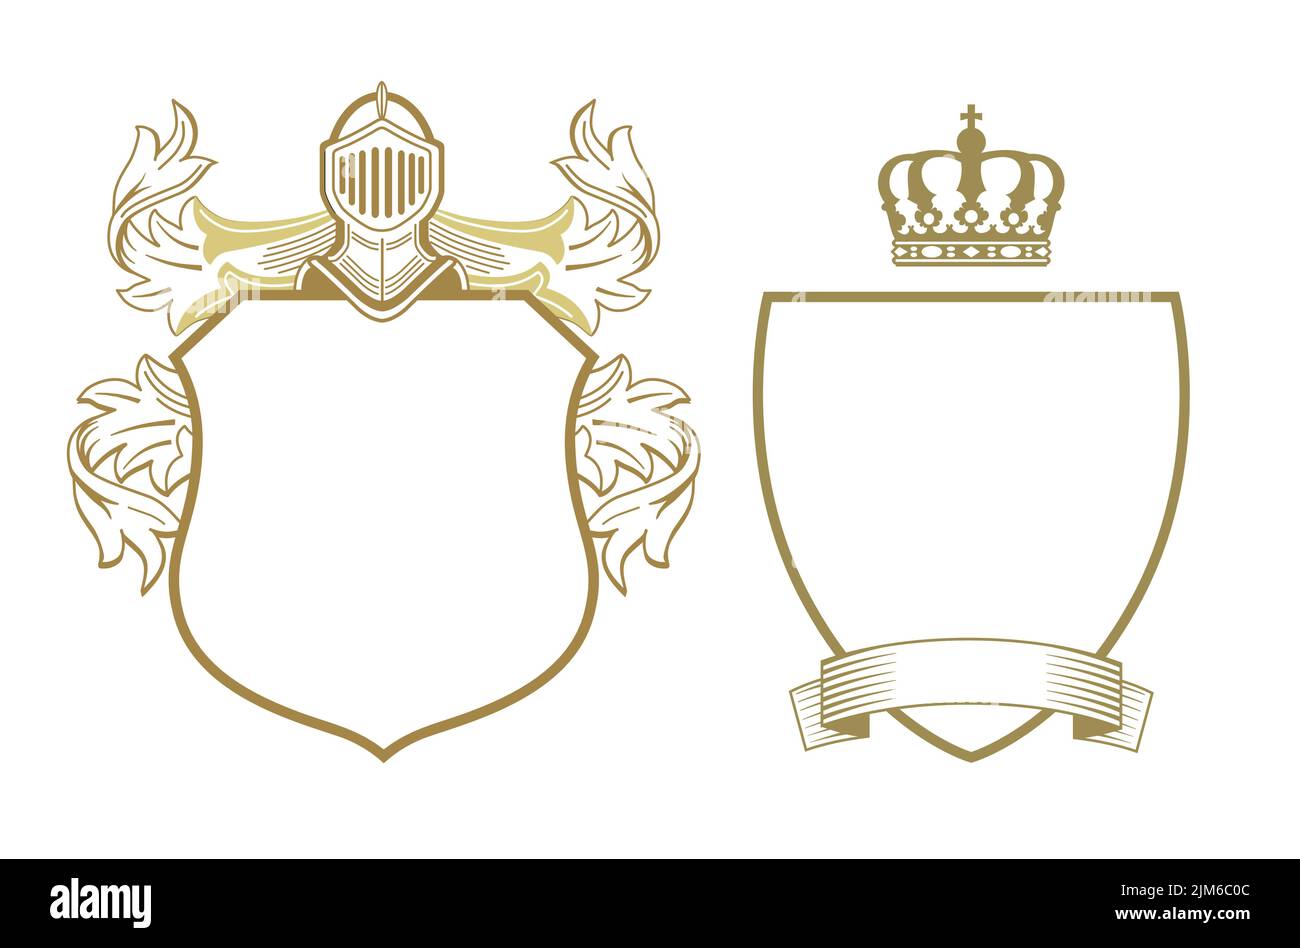 Coat of arms shield icons illustratio Stock Vector